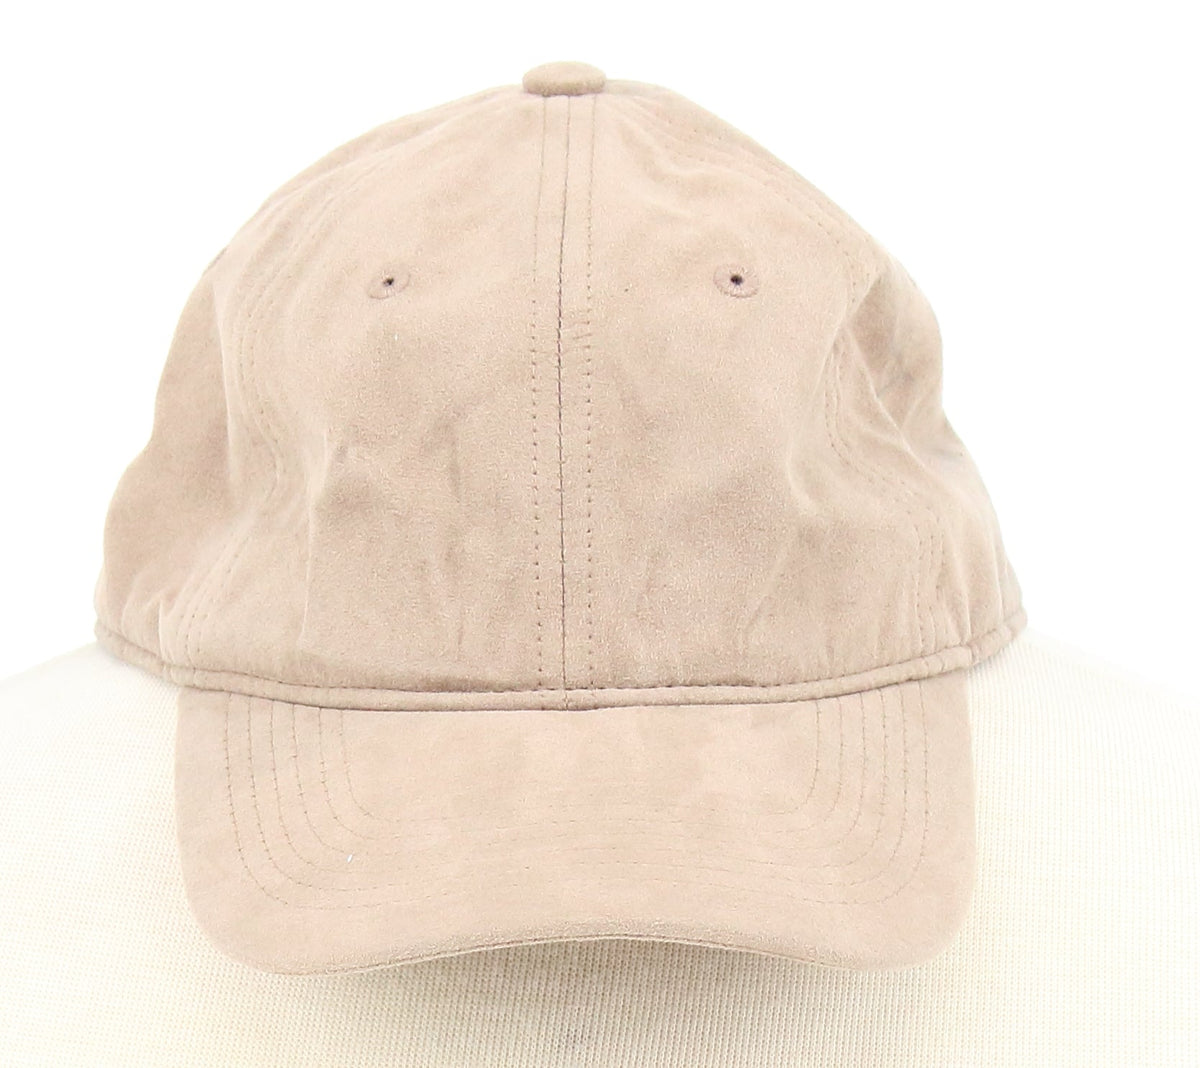 Goodfellow & Co. Light Brown Velvet Cap With Leather Adjustable Tab